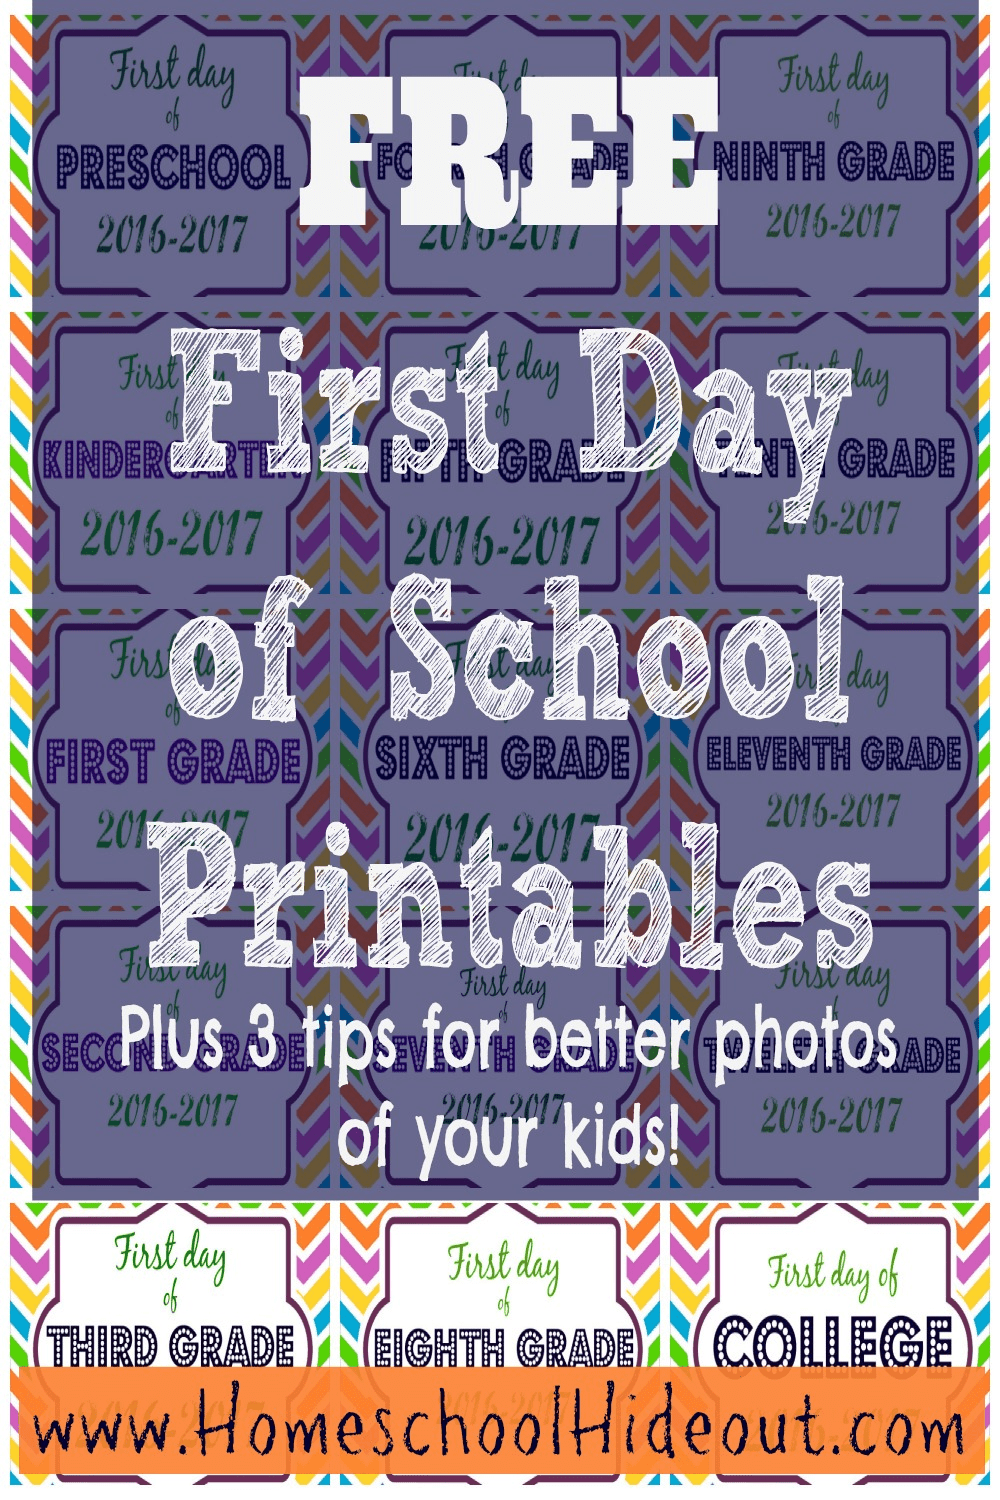 Oh! I'm loving these colorful and FREE back to school printables. They make it so easy to remember which year/grade the kids are in. Gotta get these, PRONTO!